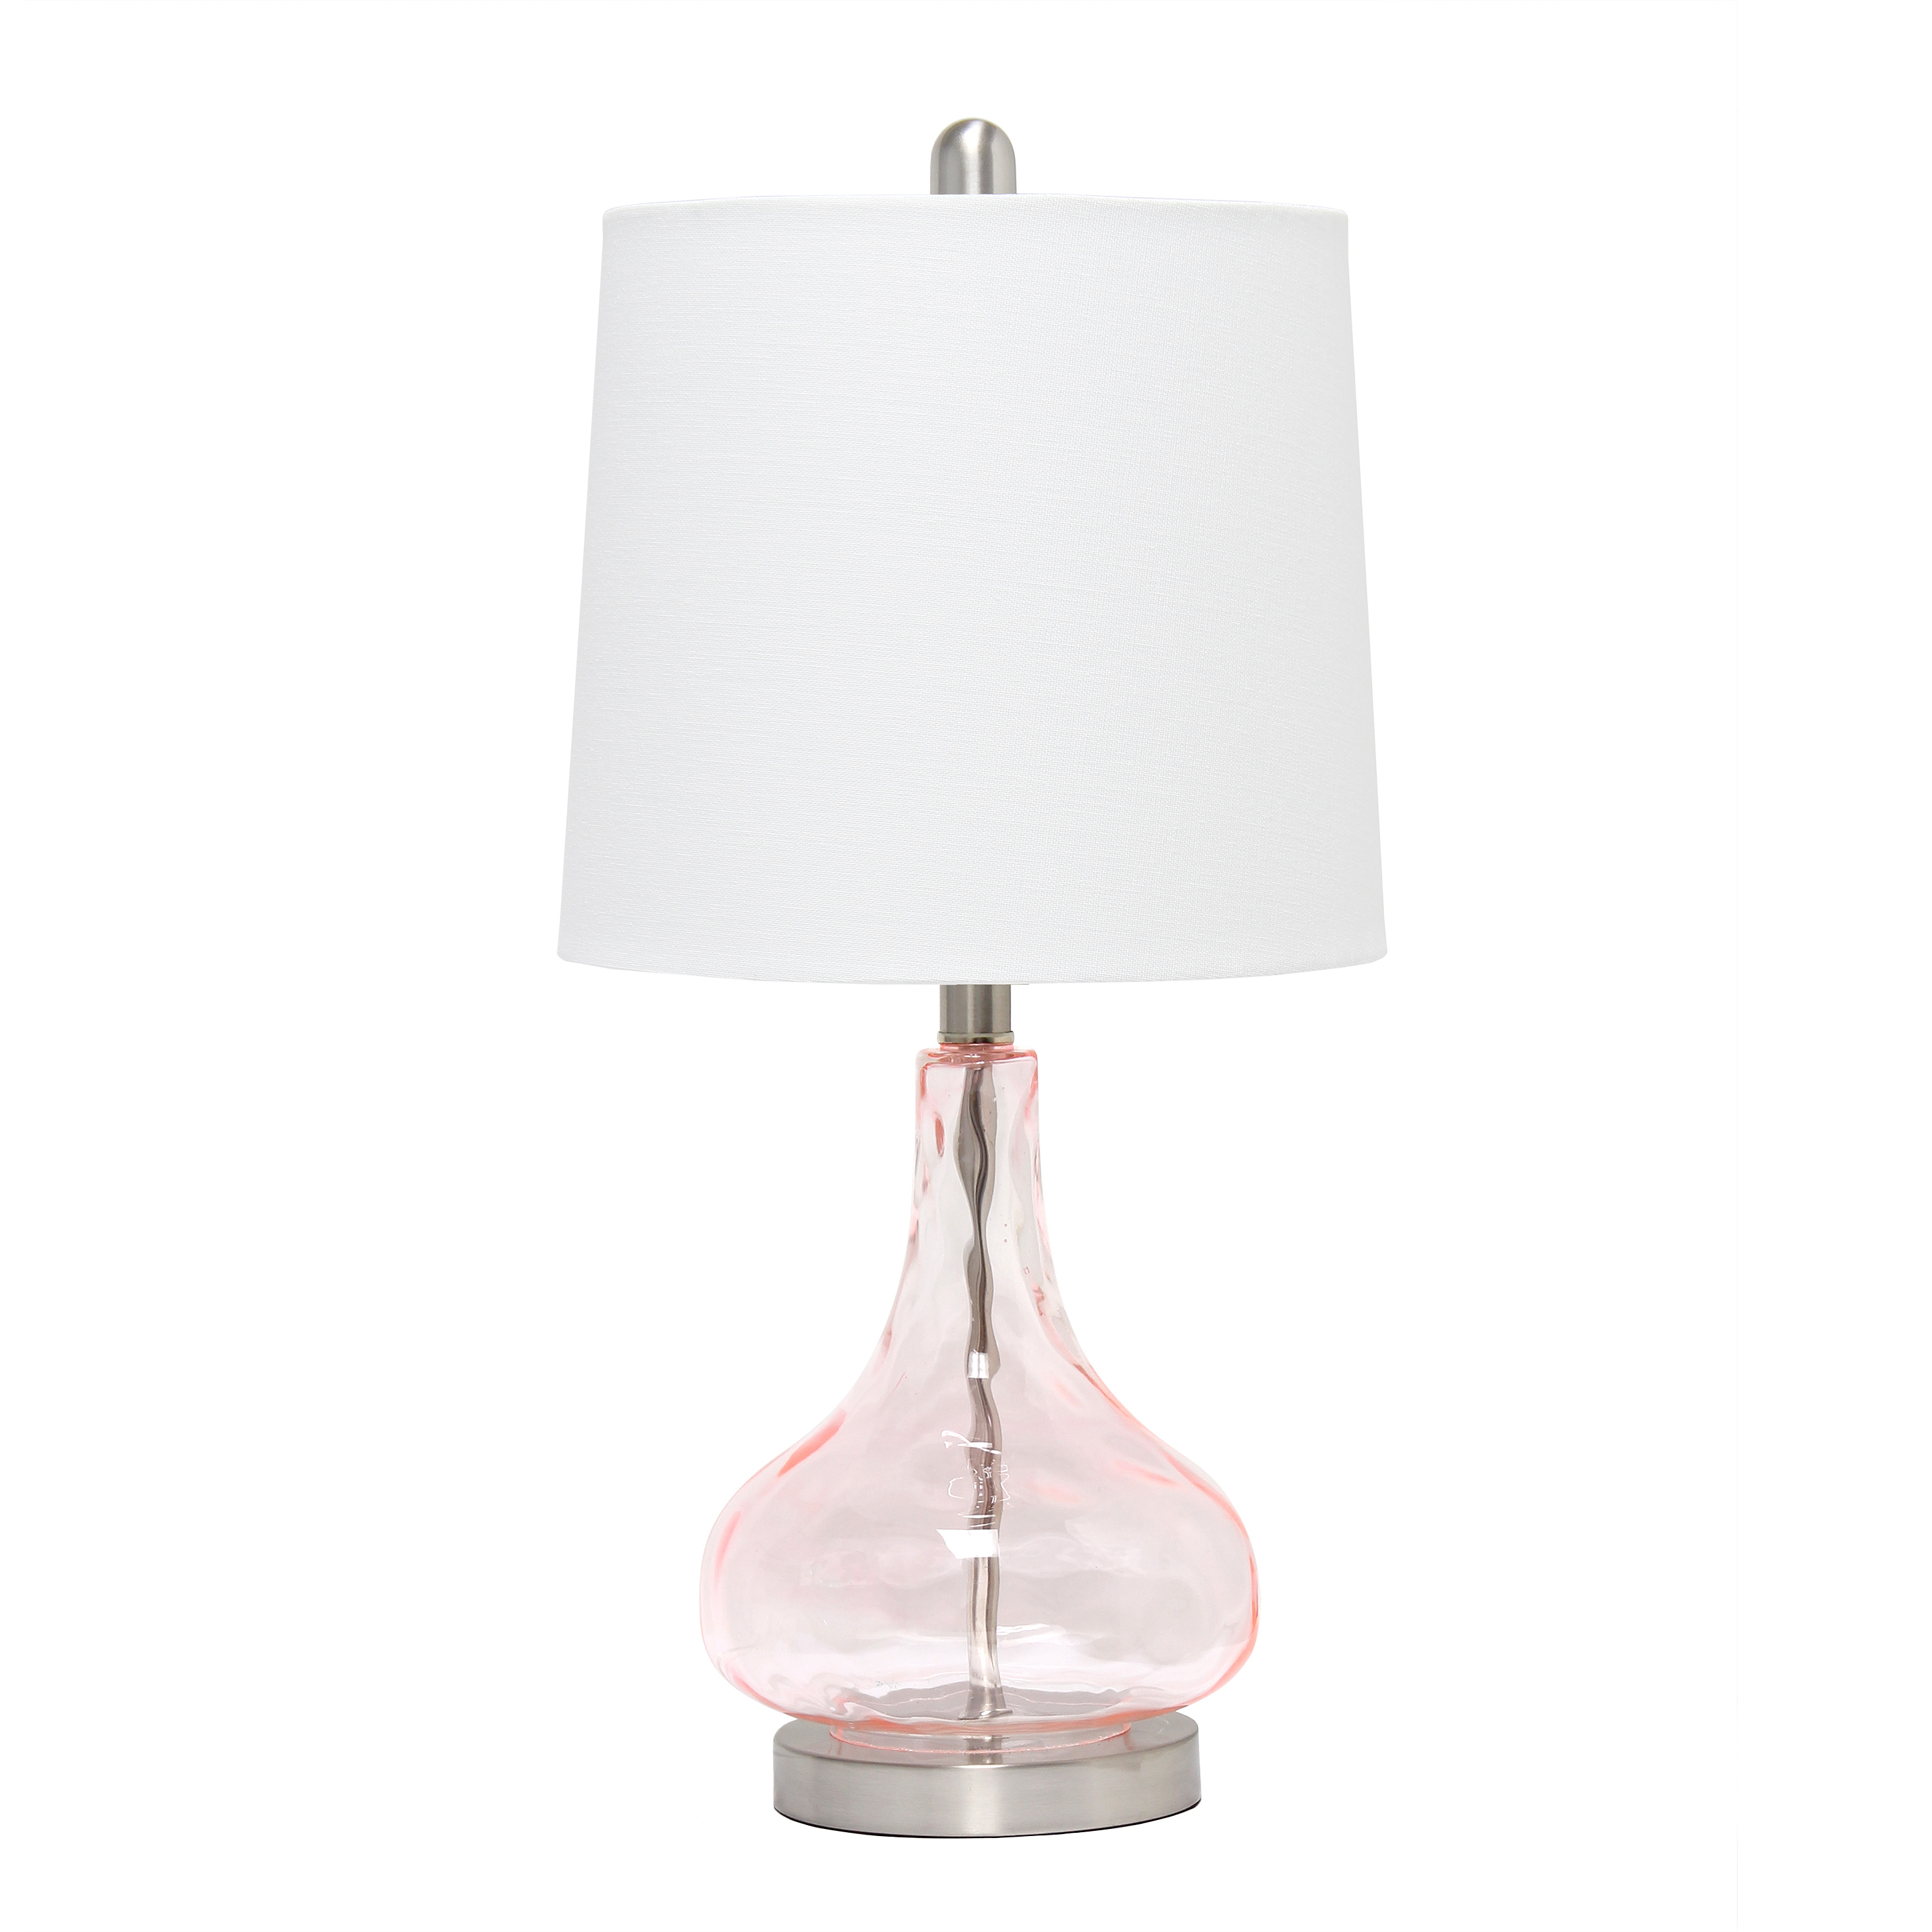 Lalia Home Rippled Glass Table Lamp with Fabric Shade, Rose Quartz